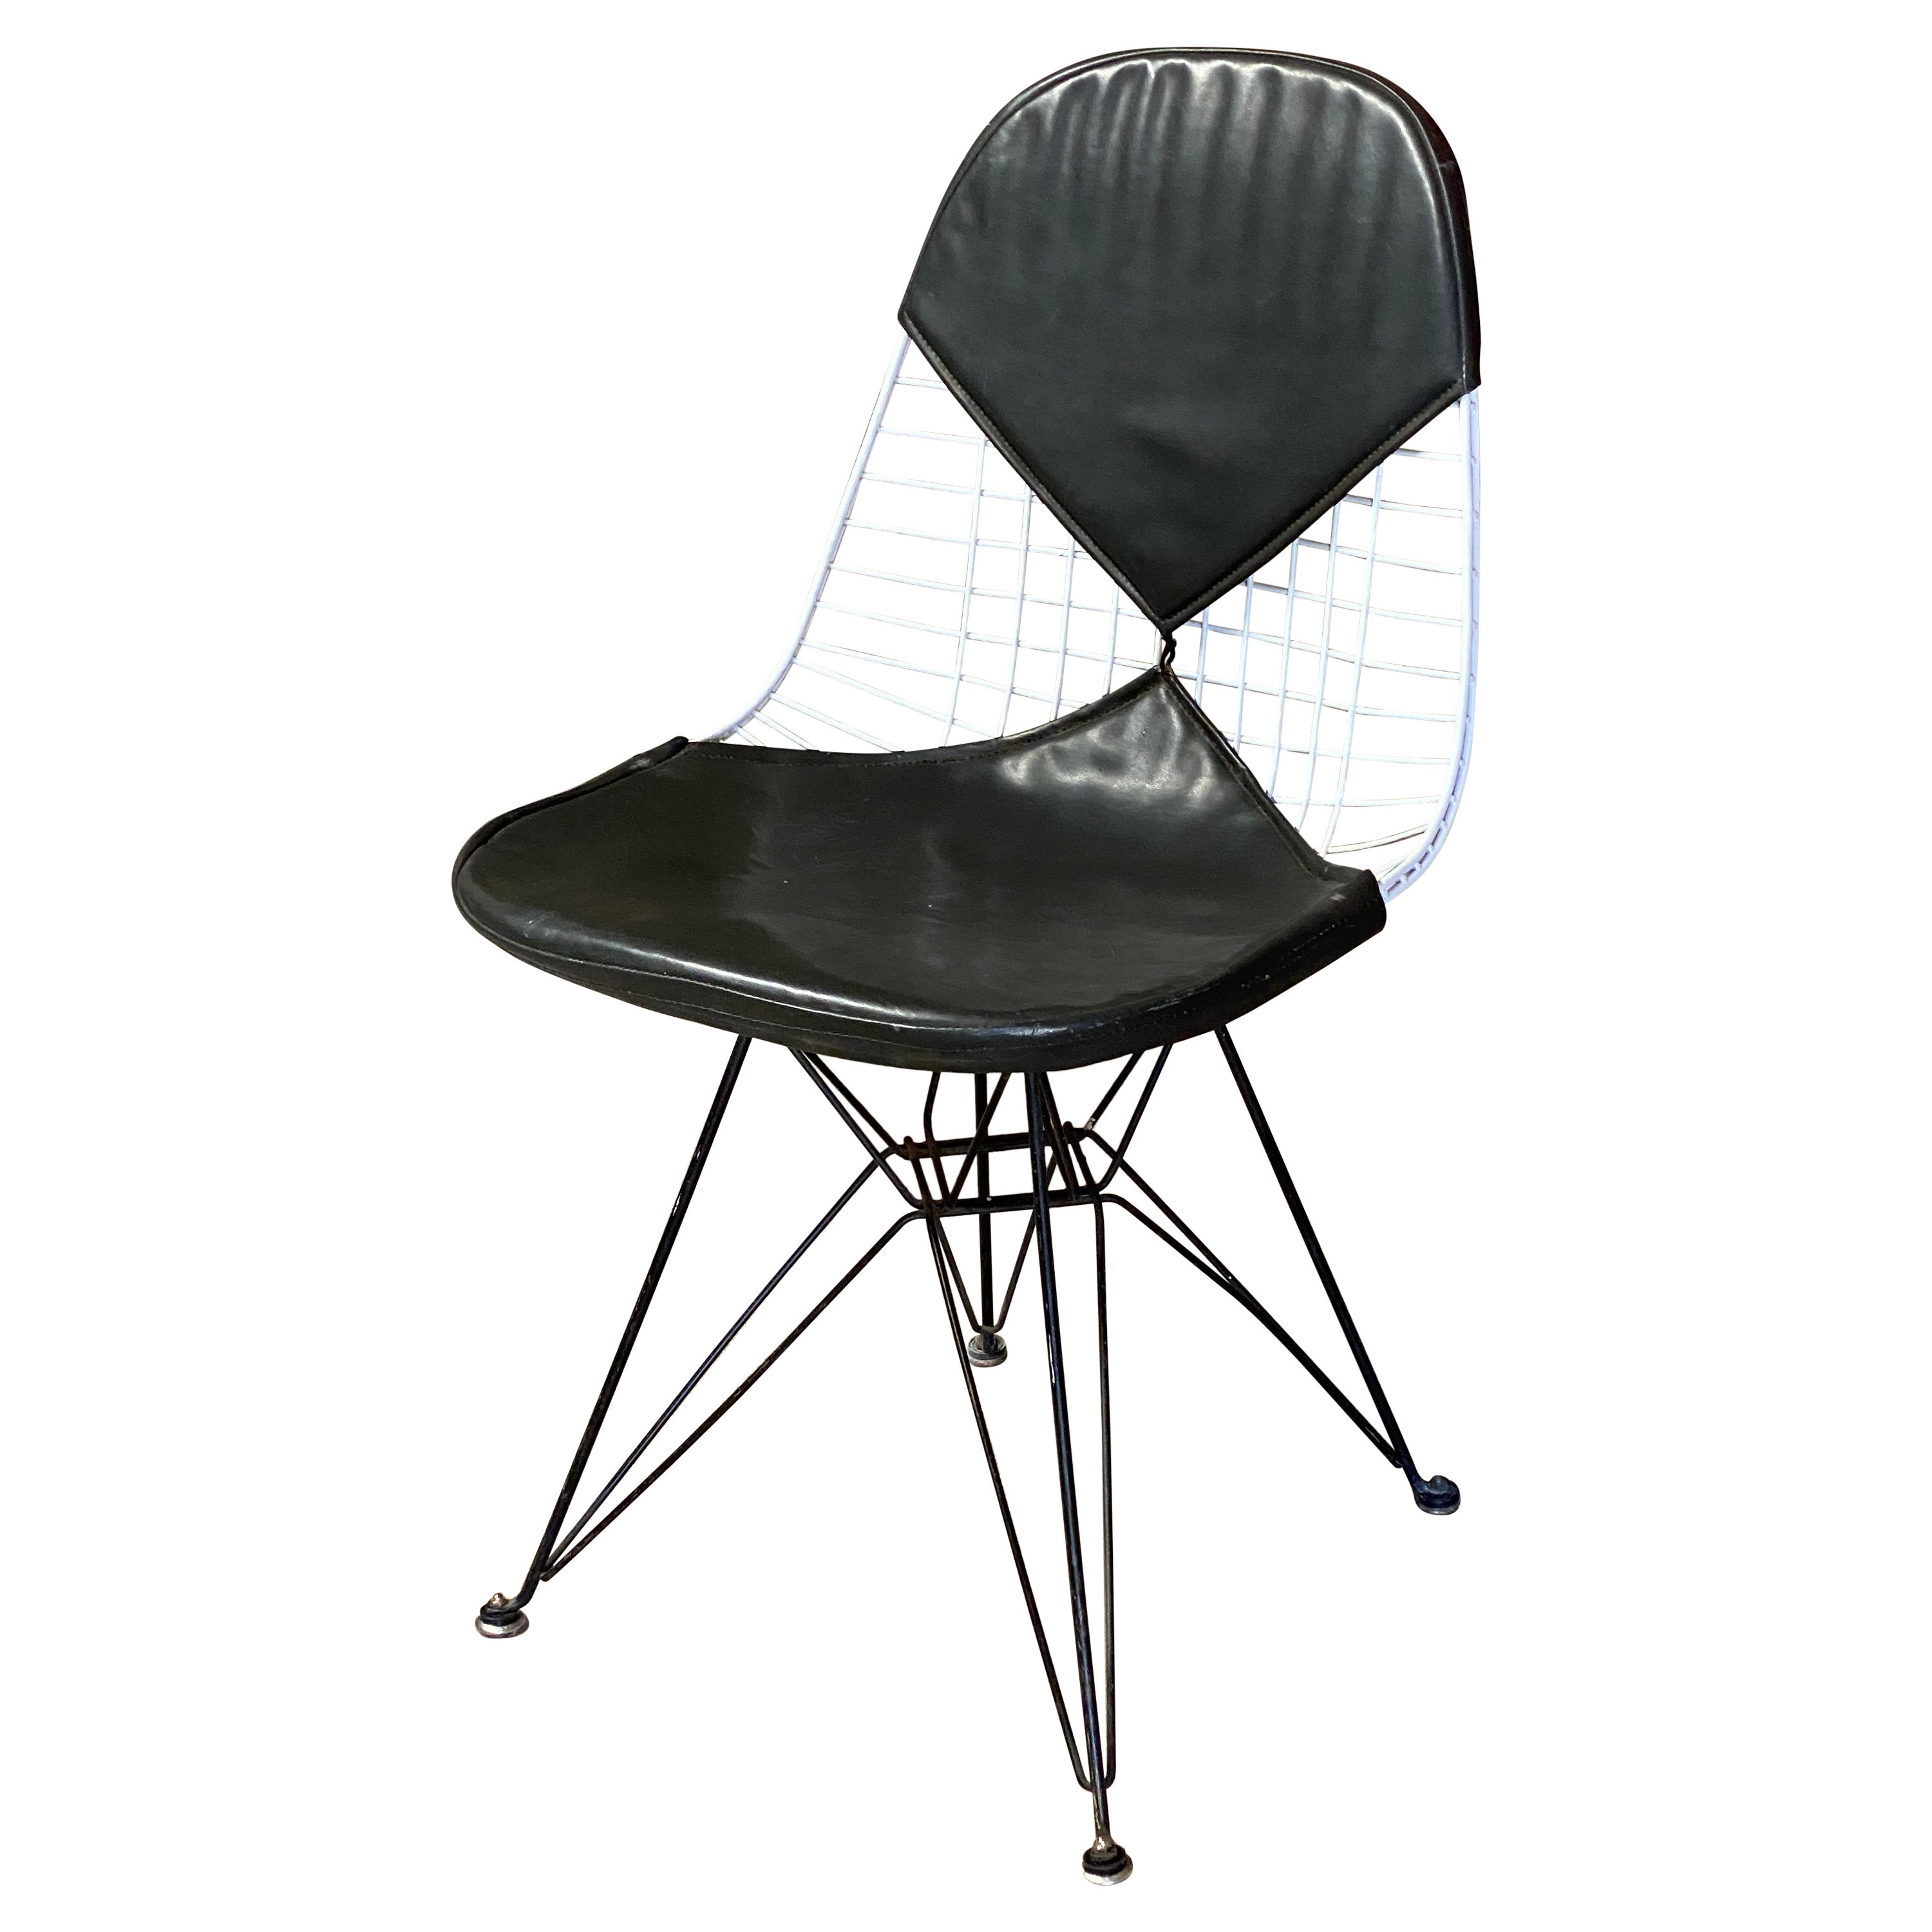 1st Generation Eames Dkr-2 Wire Eiffel Tower Chair